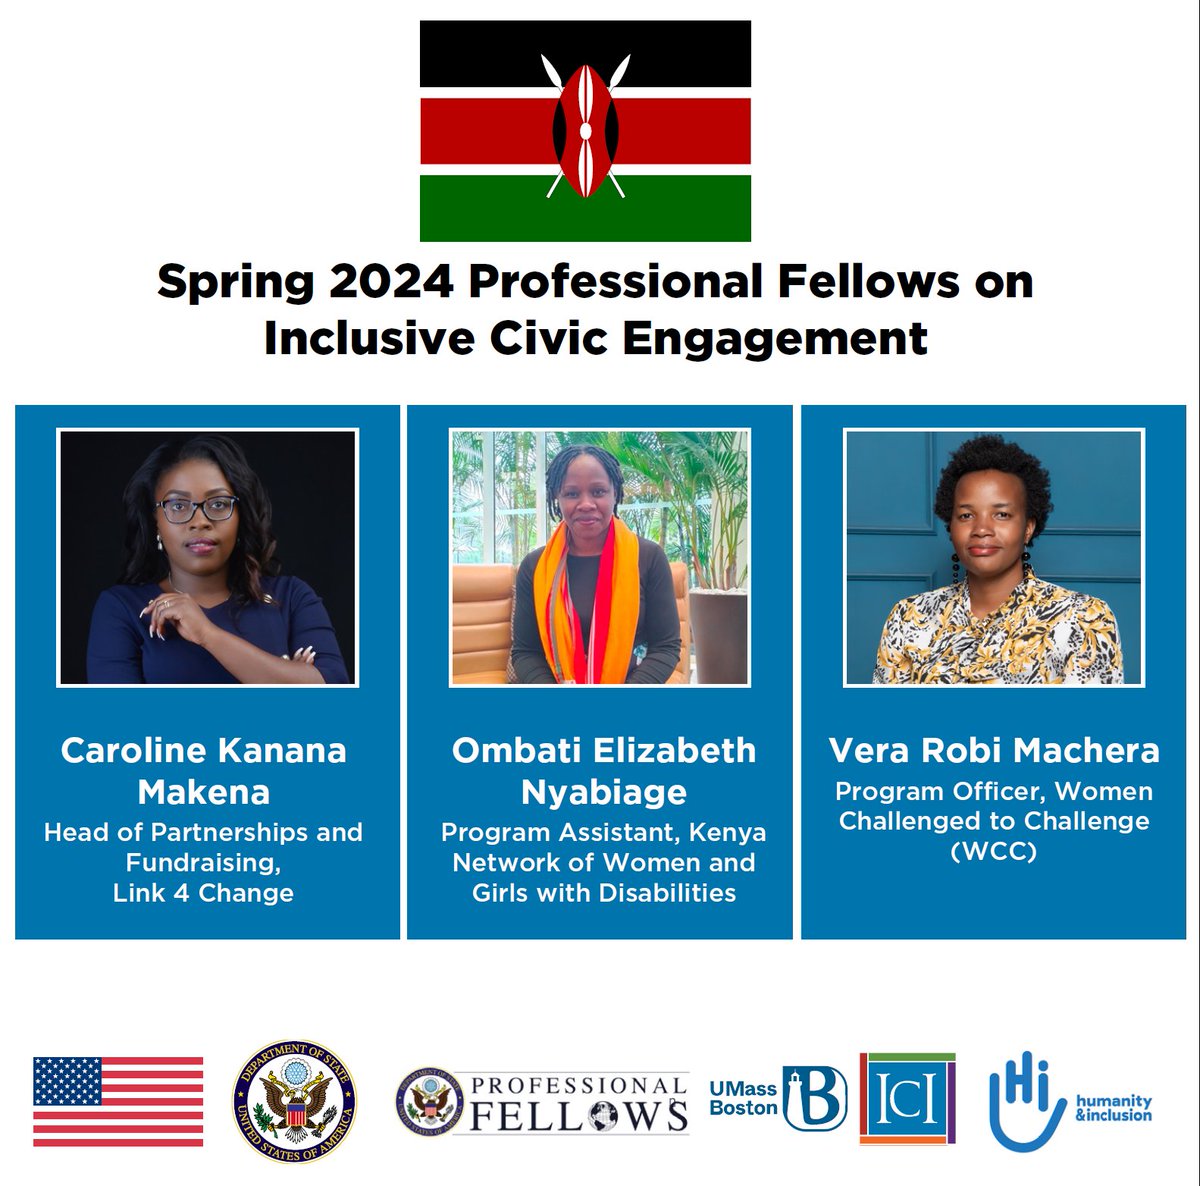 Congratulations our Spring 2024 #ProFellows! These Kenyan leaders will travel to the U.S. to share disability-inclusive civic engagement practices with American colleagues. @ECAatState @ICInclusion @HI_EARegion #ExchangeOurWorld #USKEat60